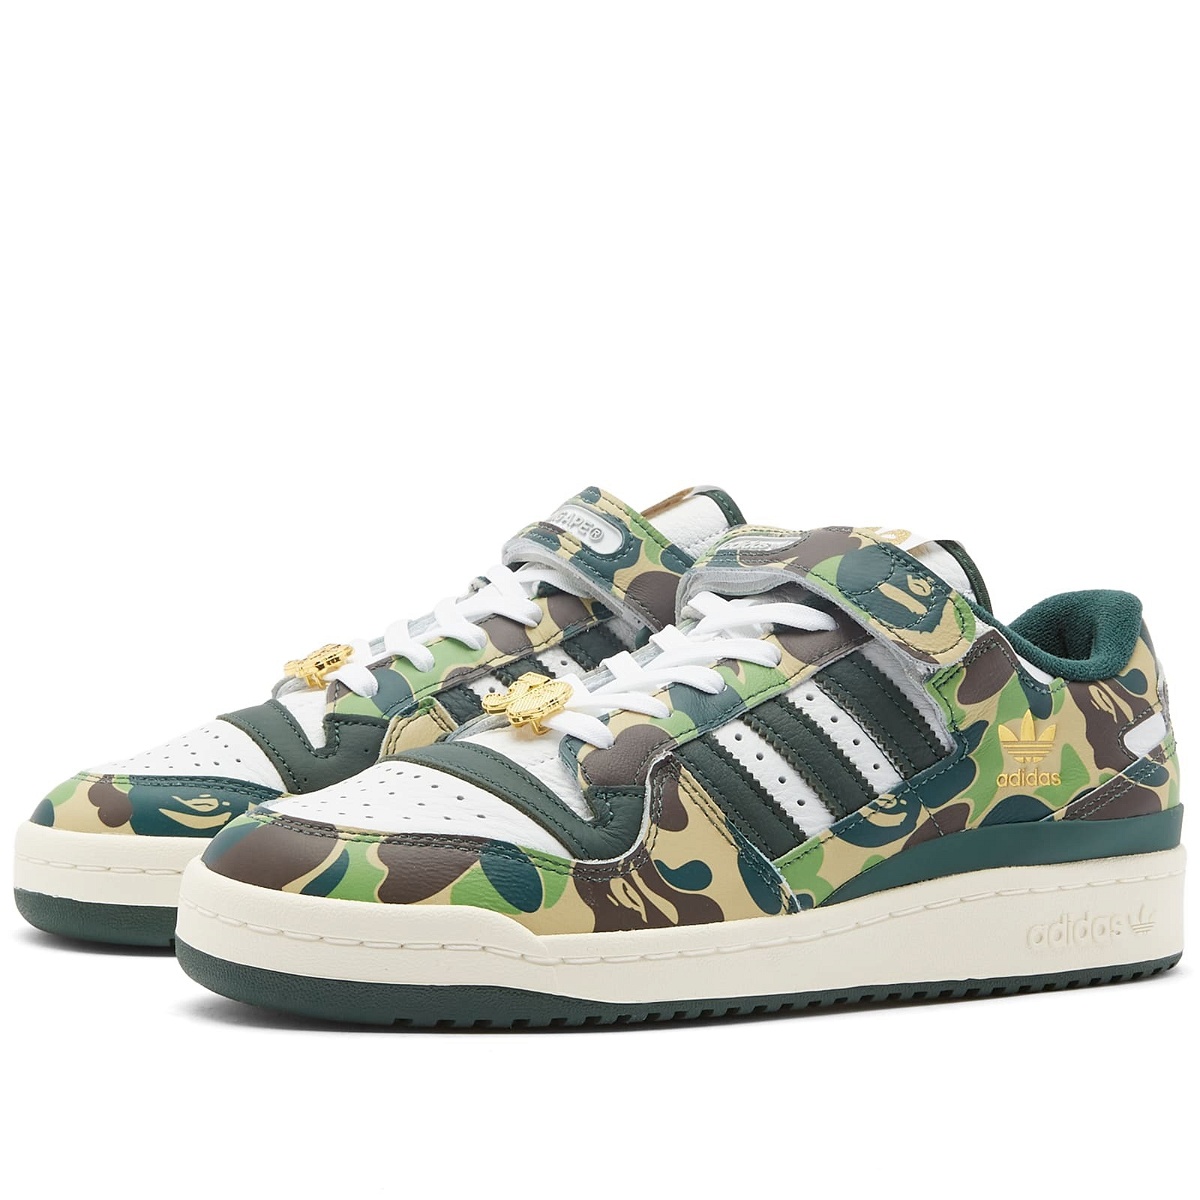 Adidas X Bape Forum  Low Sneakers in White/Off White adidas